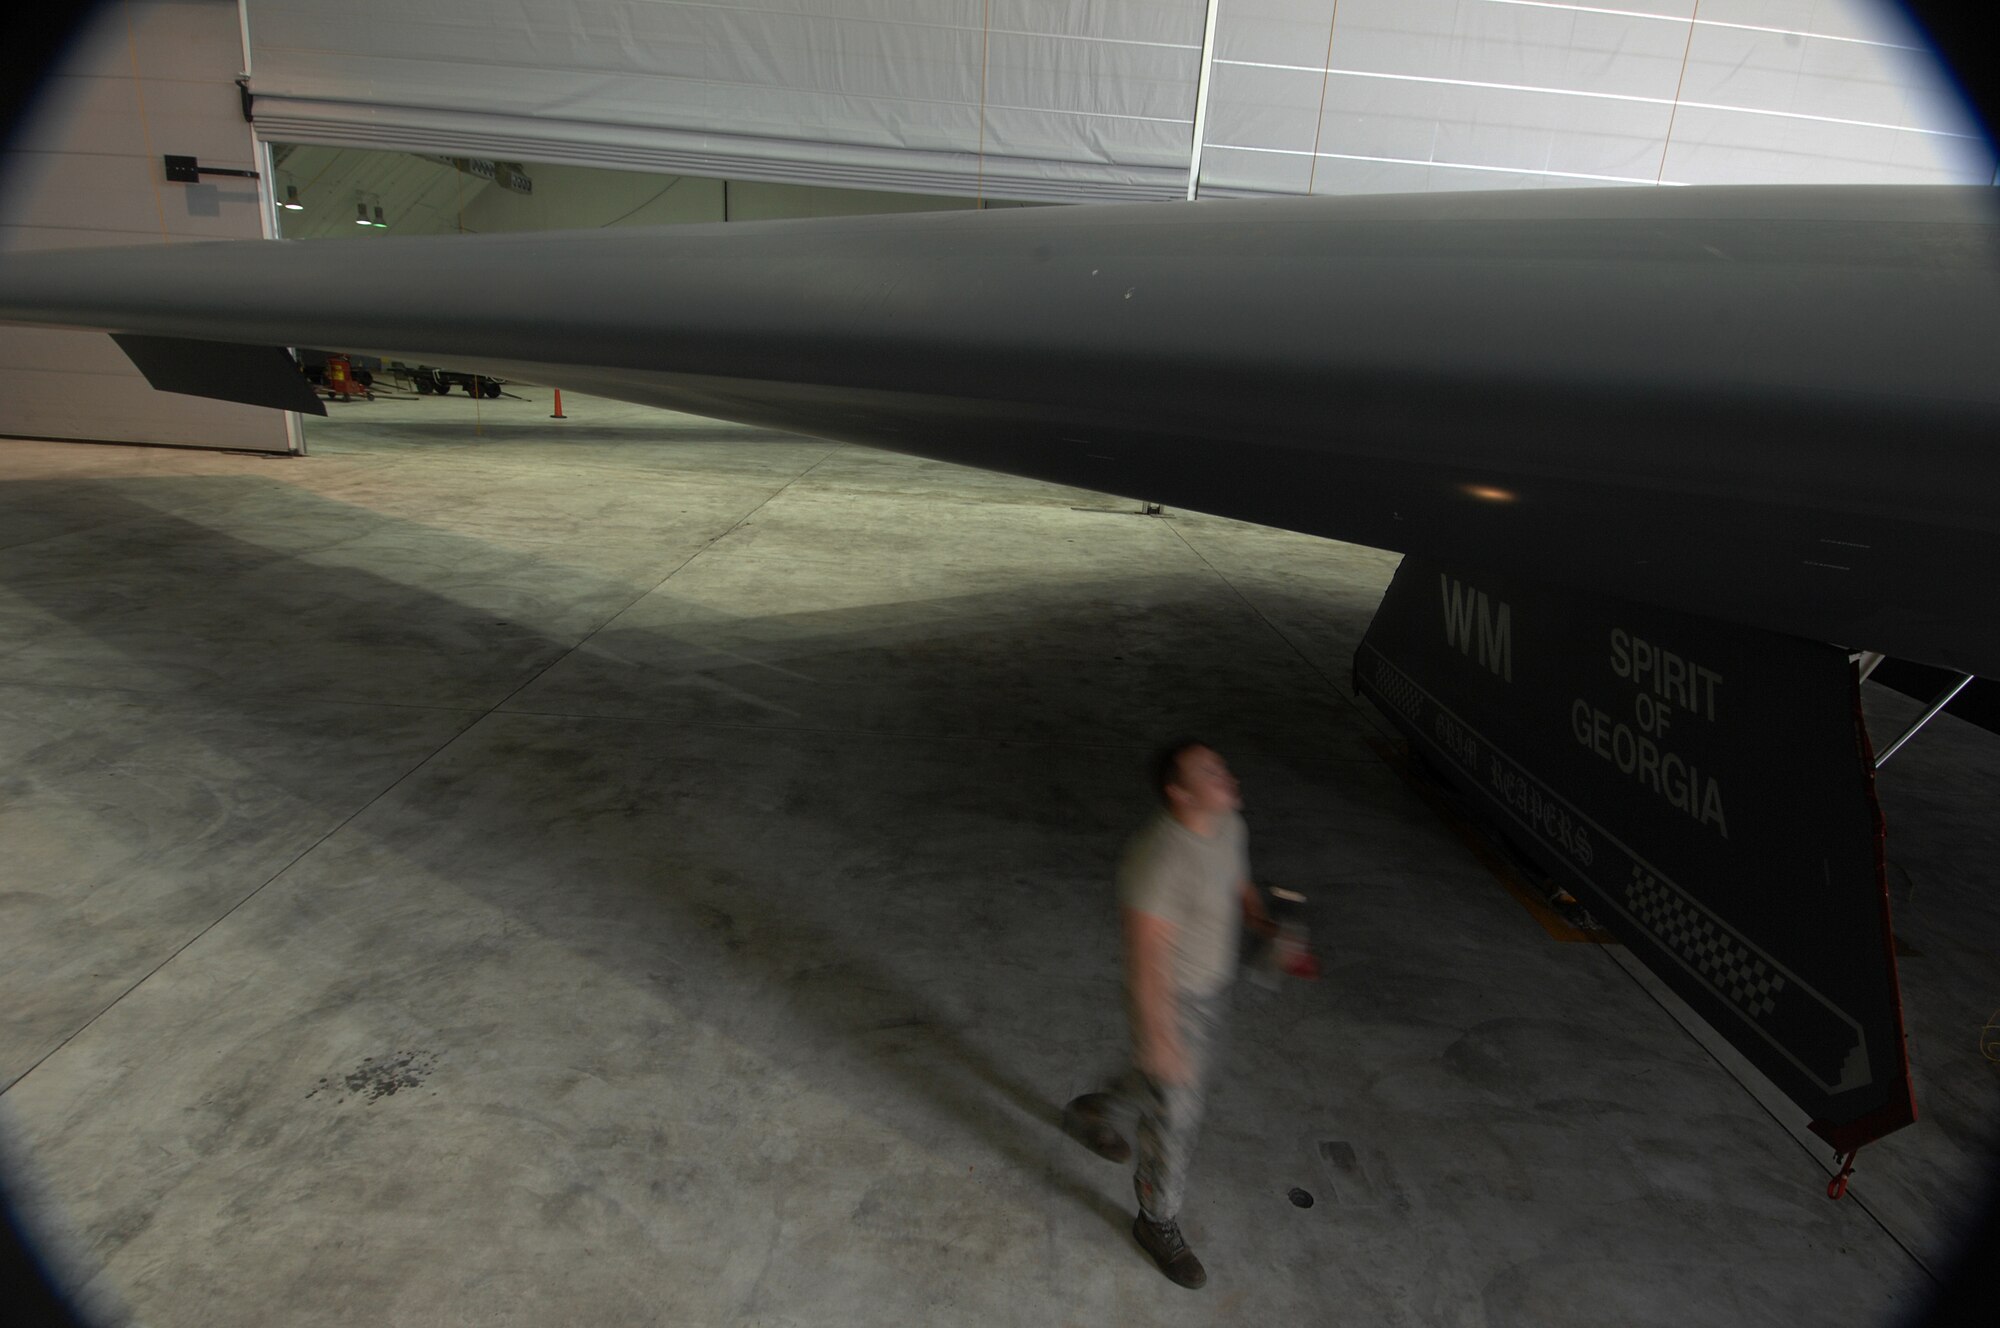 ANDERSEN AIR FORCE BASE, Guam -- Staff Sergeant Scott Kures walk around a wing to check for leaking drains as part of routine pre-flight maintenance on a B-2 Spirit stealth bomber. Sergeant Kures is part of a maintenance team supporting the remaining B-2 Spirits at Andersen AFB. Keeping the B-2 Spirit bomber at a mission-ready status requires lots of hard work and a huge team effort by all maintainers working on the multi-role stealth bomber. The B-2s here have remained suspended pending the results from a safety investigation board following the first-ever crash of a stealth bomber Feb. 23 here, at Andersen AFB. The continuous bomber presence demonstrates U.S. commitment to promote security and stability in the Pacific region. Sergeant Kures is with the 36th Expeditionary Aircraft Maintenance Squadron and is deployed from the 509th Bomb Wing, Whiteman, AFB, Mo. (U.S. Air Force photo by Staff Sgt. Vanessa Valentine)

